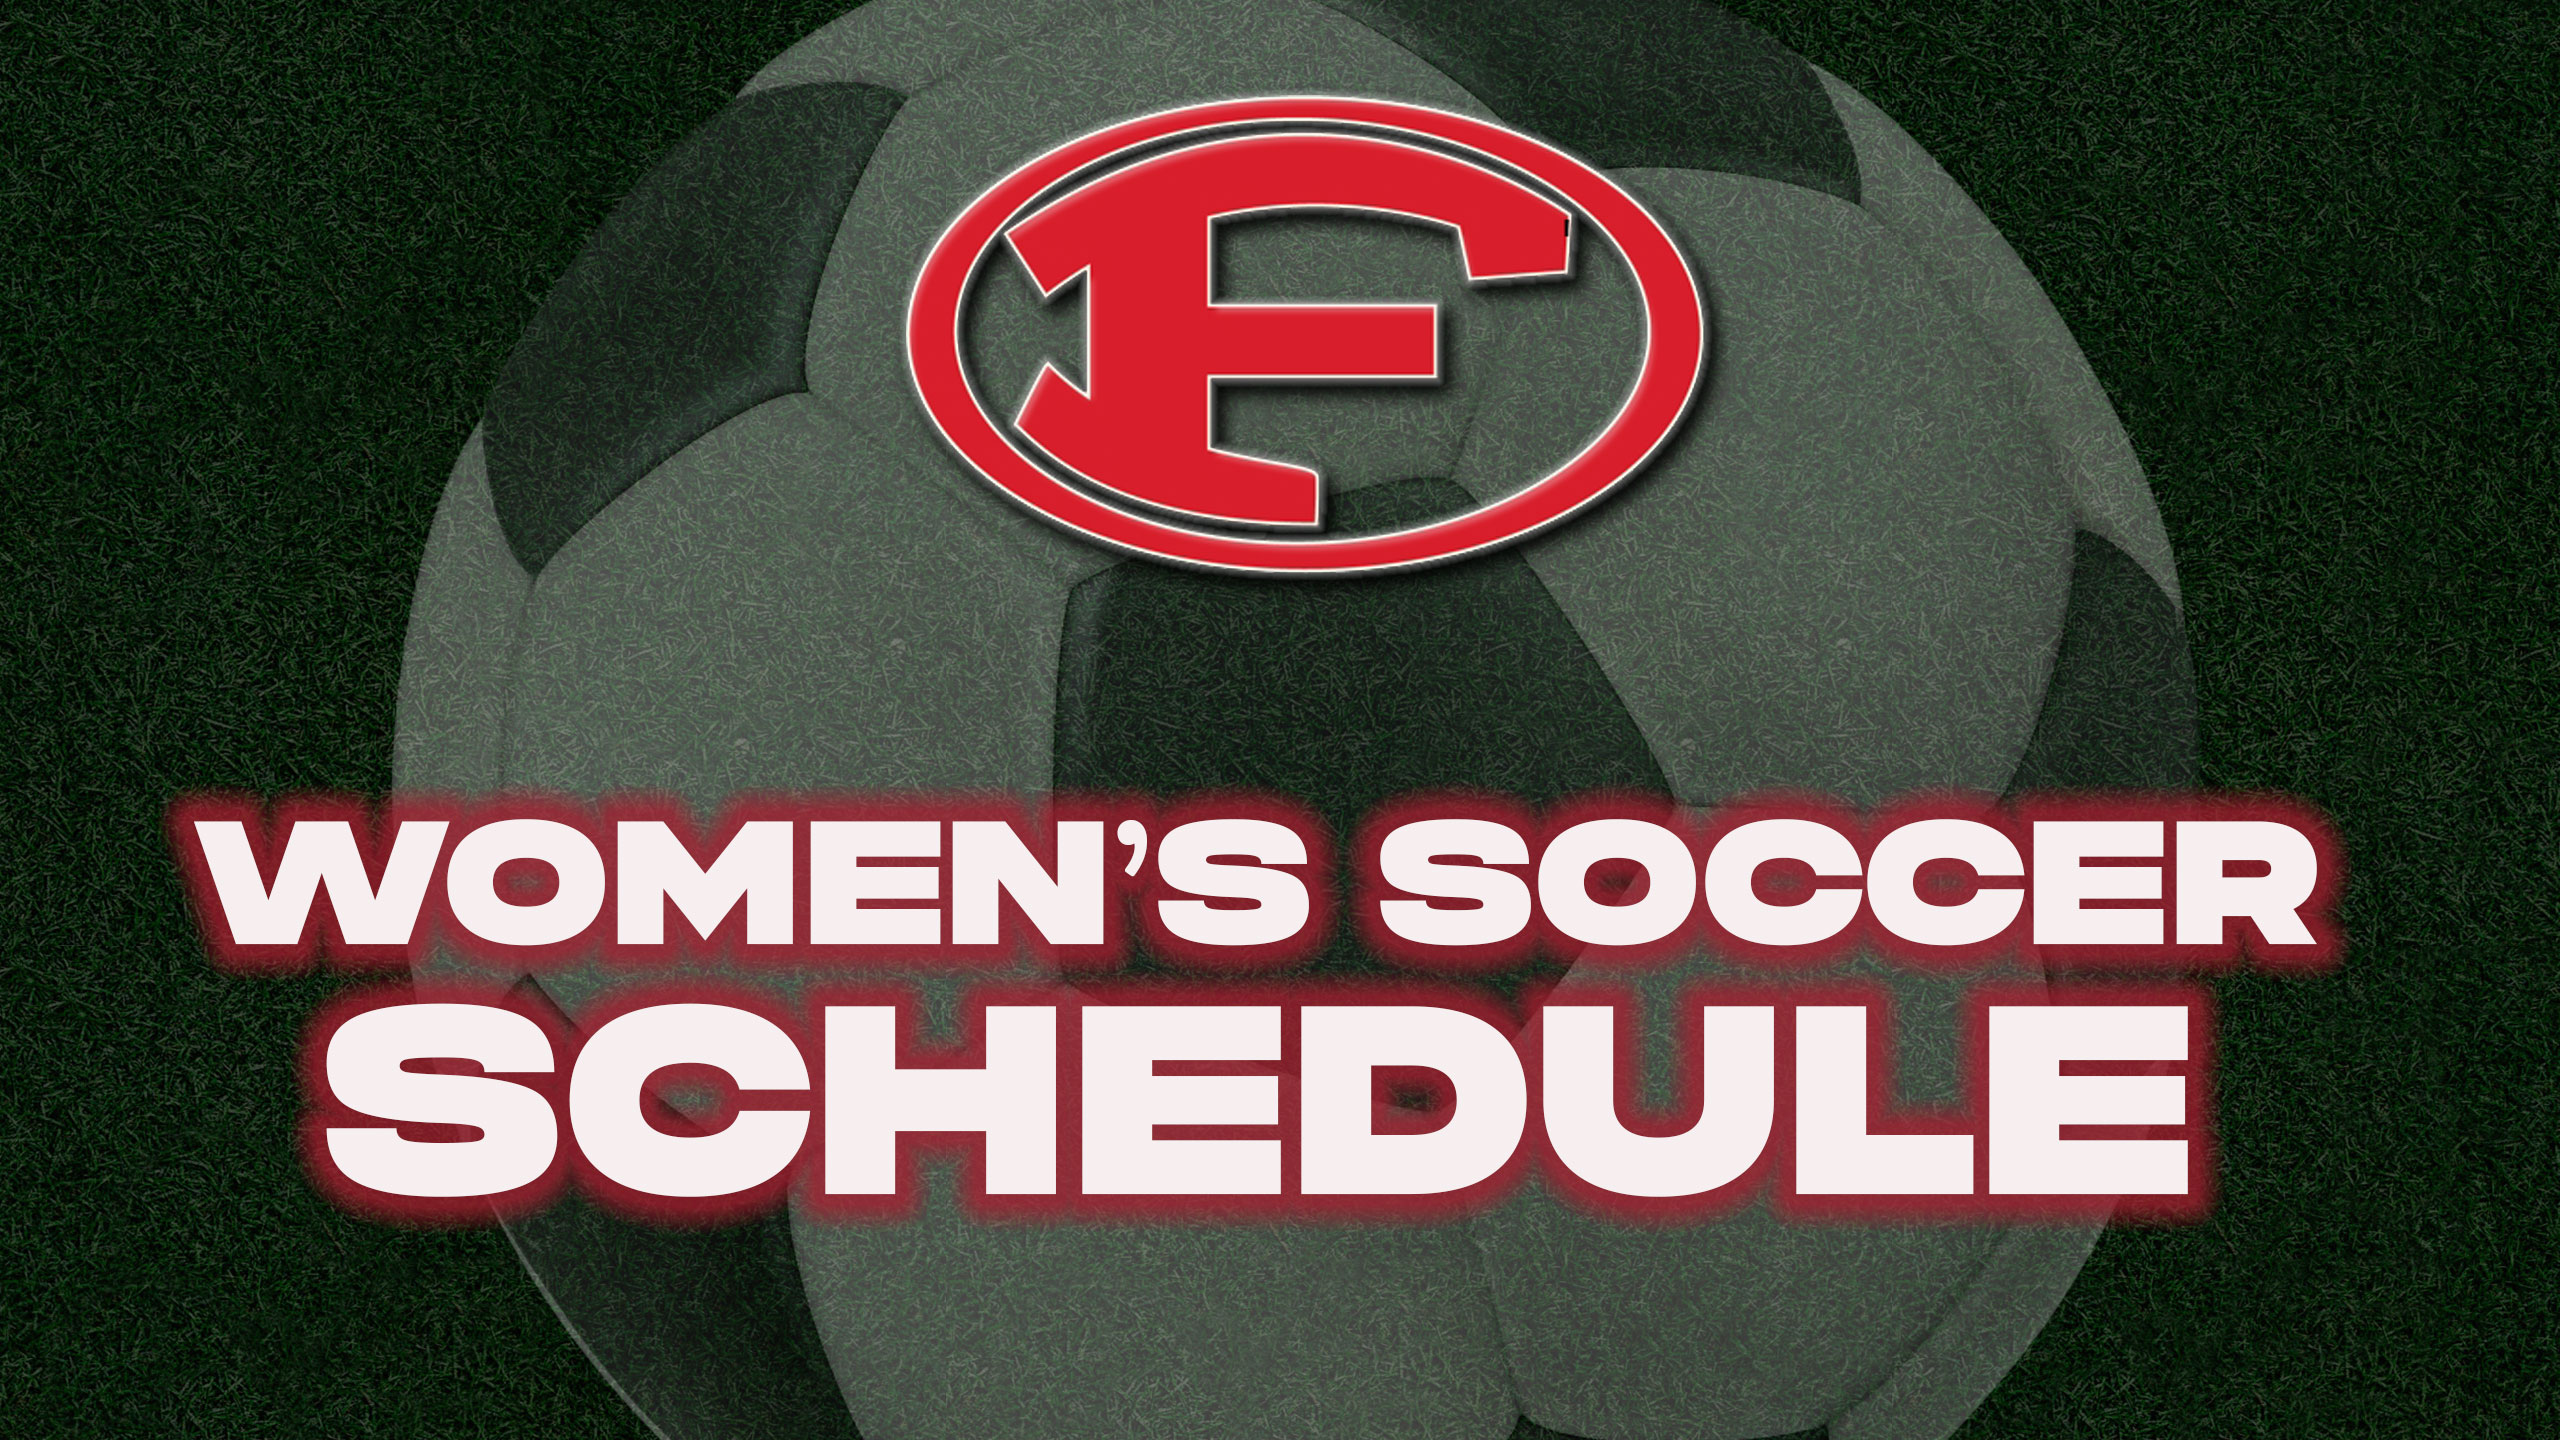 large F logo in circle at top in red. Women's soccer schedule in white text with red outline.